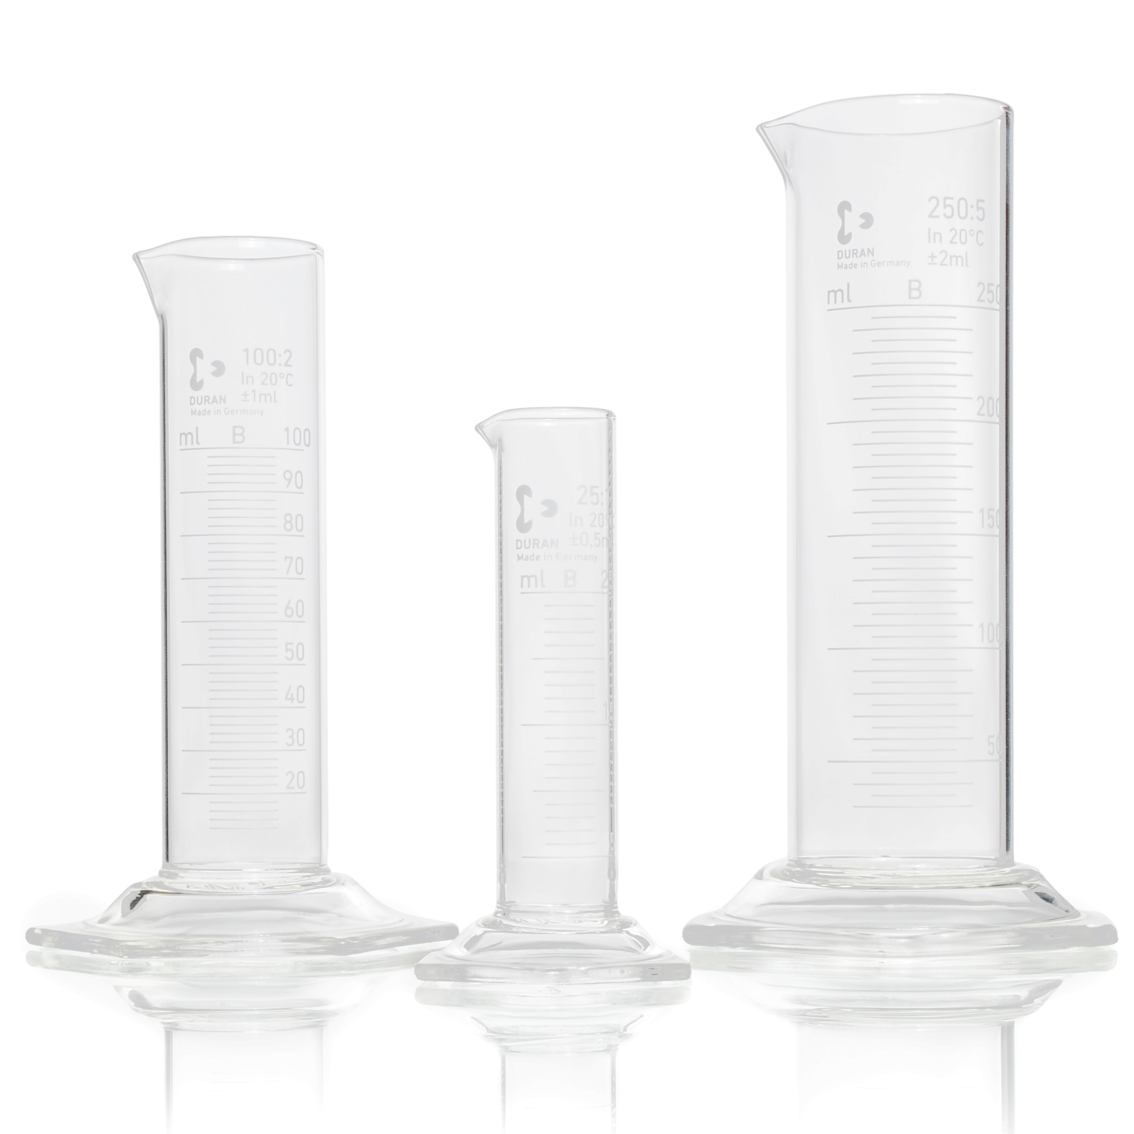 ABML 15241719 Measuring cylinder glass low model - 10ml